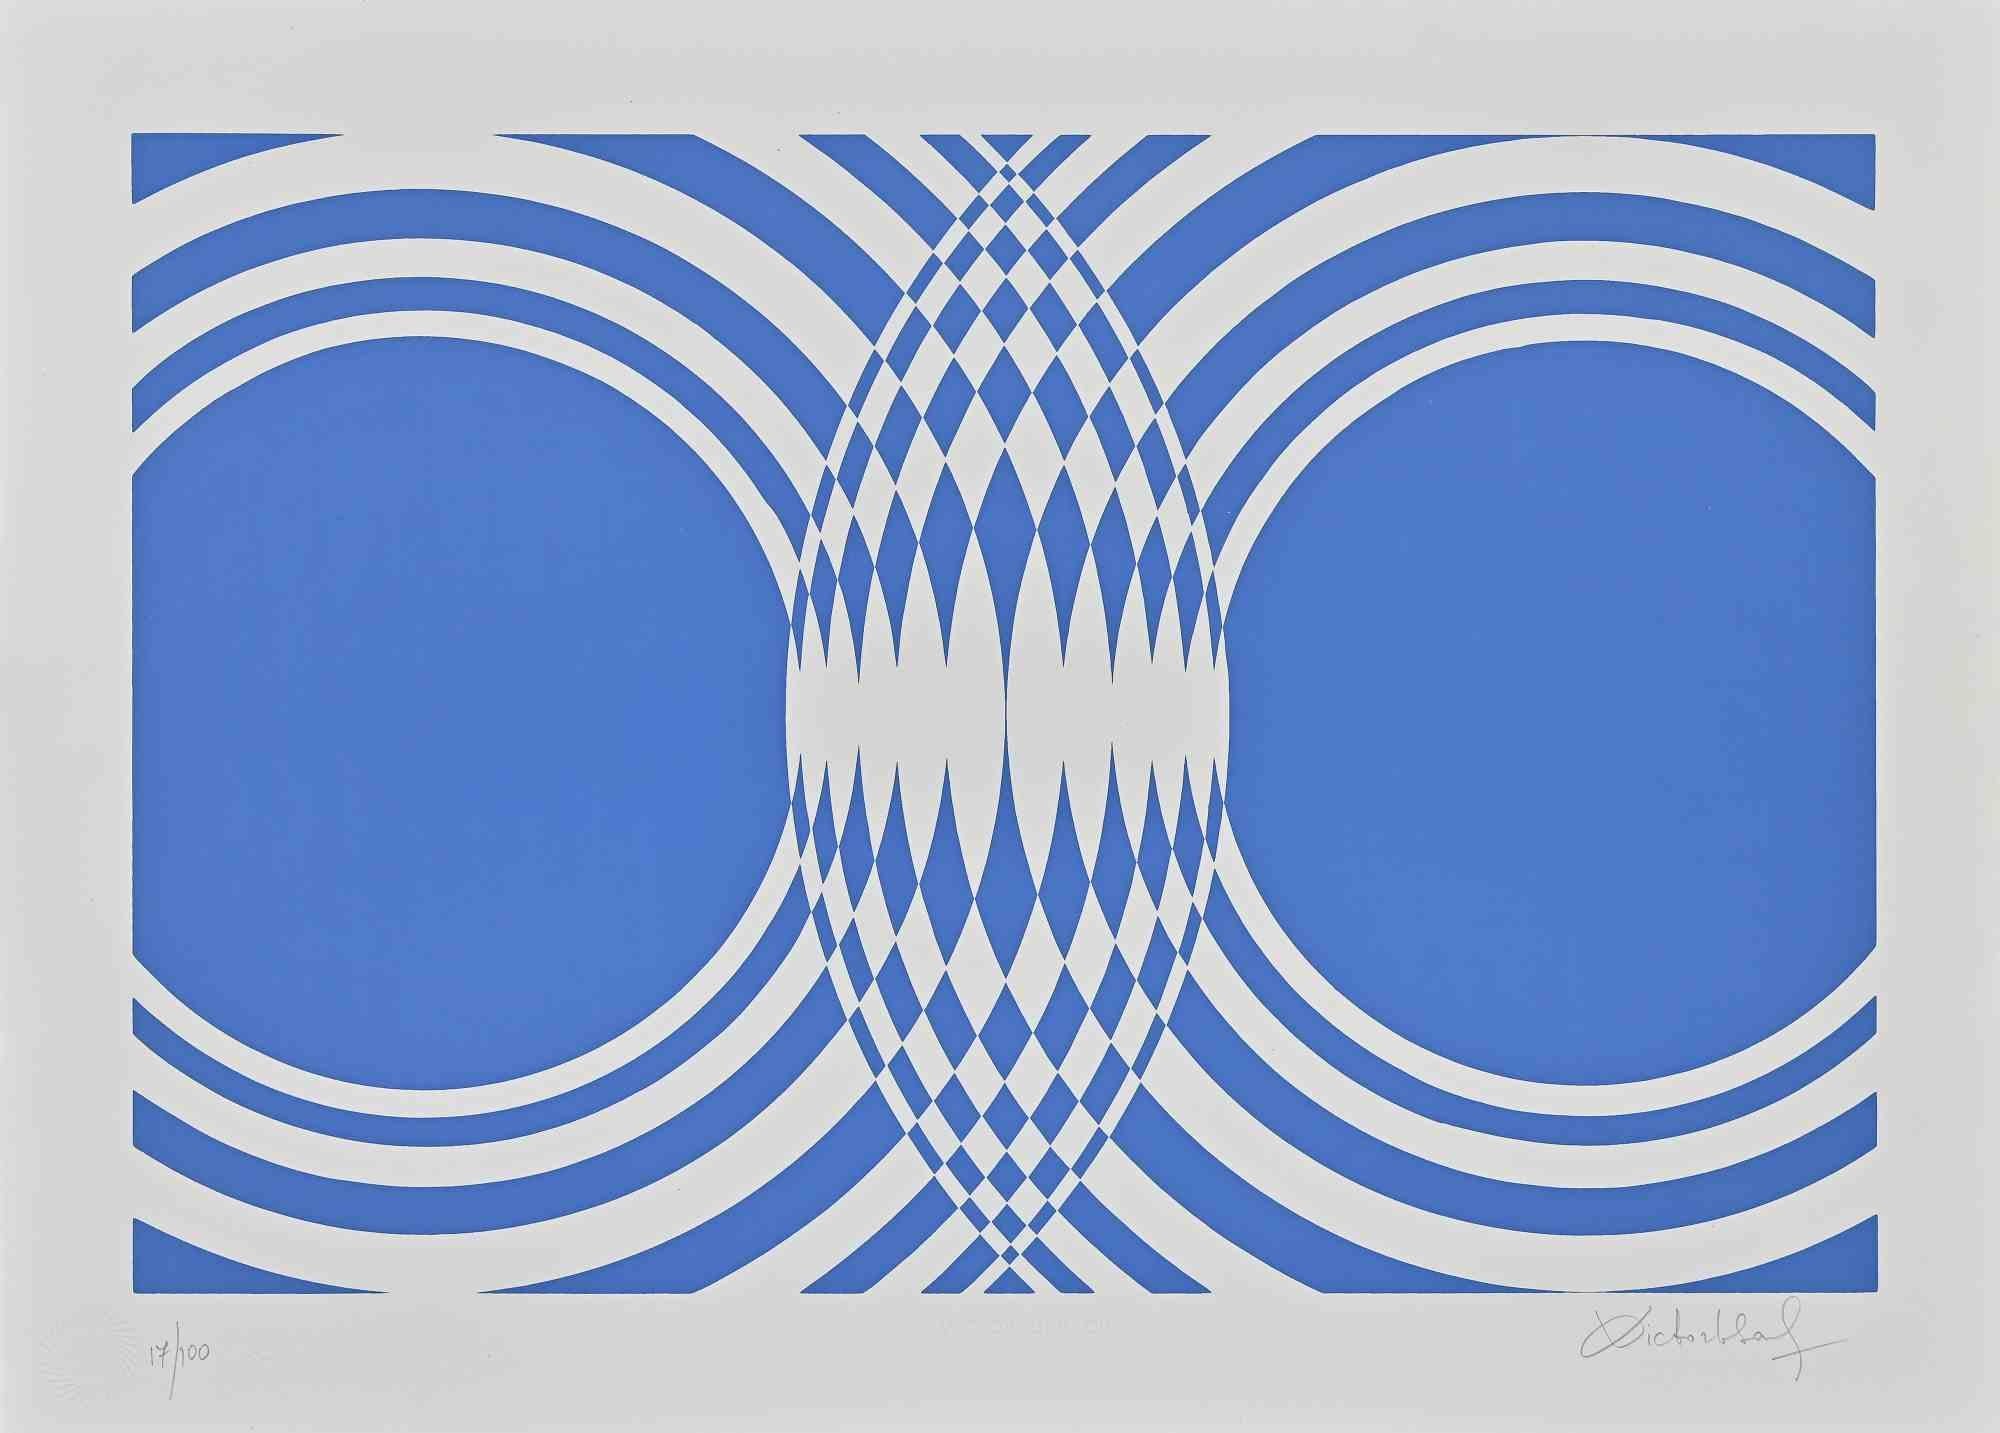 Blue Composition is a contemporary artwork realized by Victor Debach in the 1970s.

Mixed colored screen print on paper.

Hand signed on the lower right margin.

Numbered on the lower left.

Edition of 17/100.